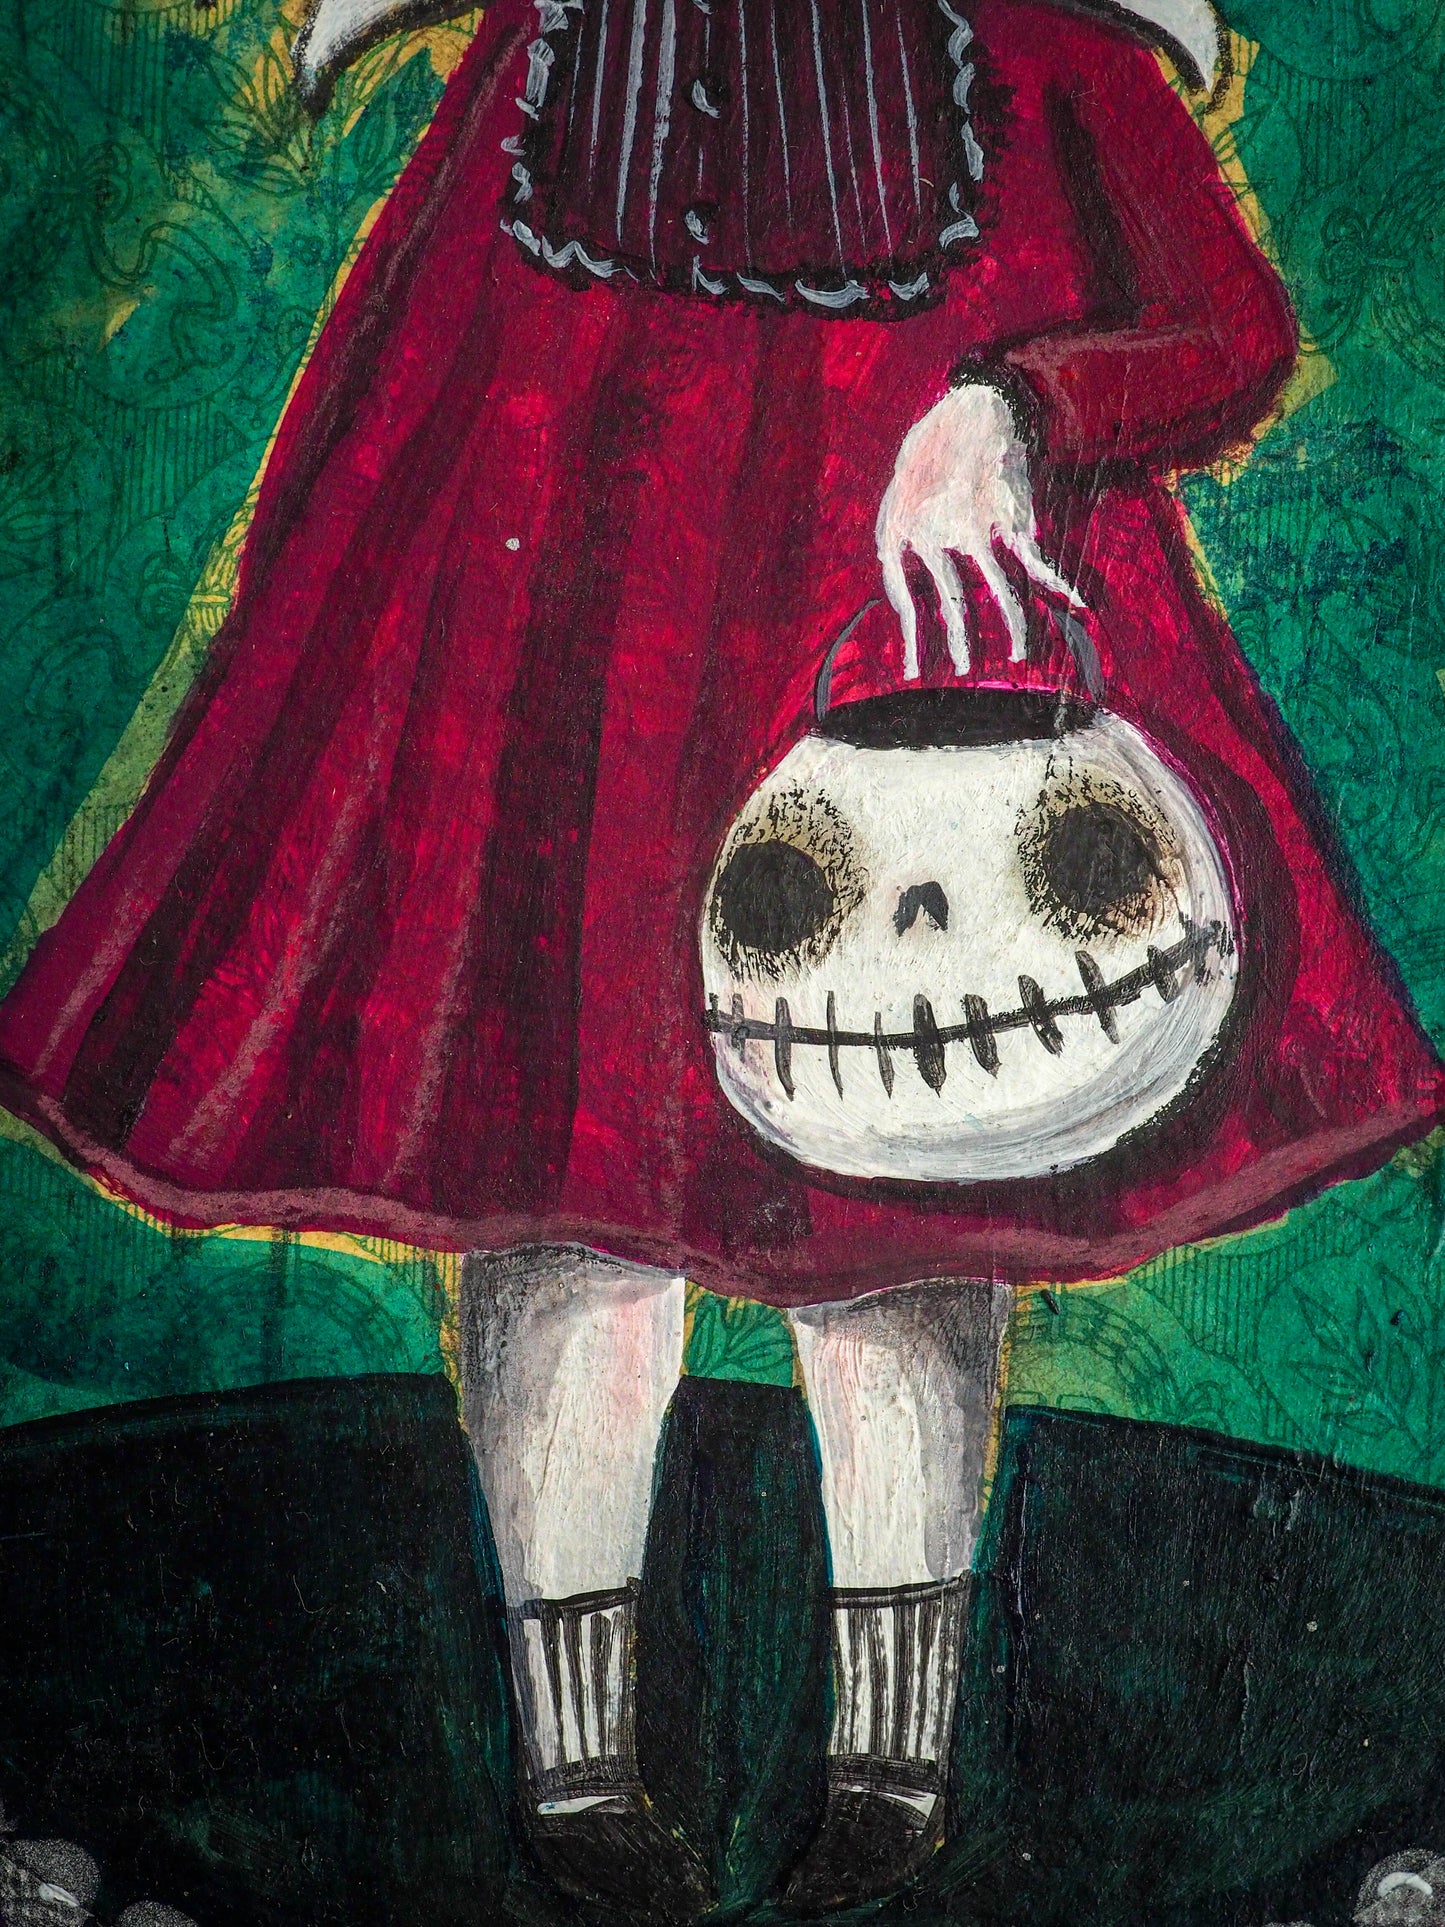 Original painting by Danita, a vampire undead zombie ghoul girl with Halloween with a skull pumpkin jack-o-lantern in her arms. Whimsical and surreal art perfect as home decor this Halloween Night.